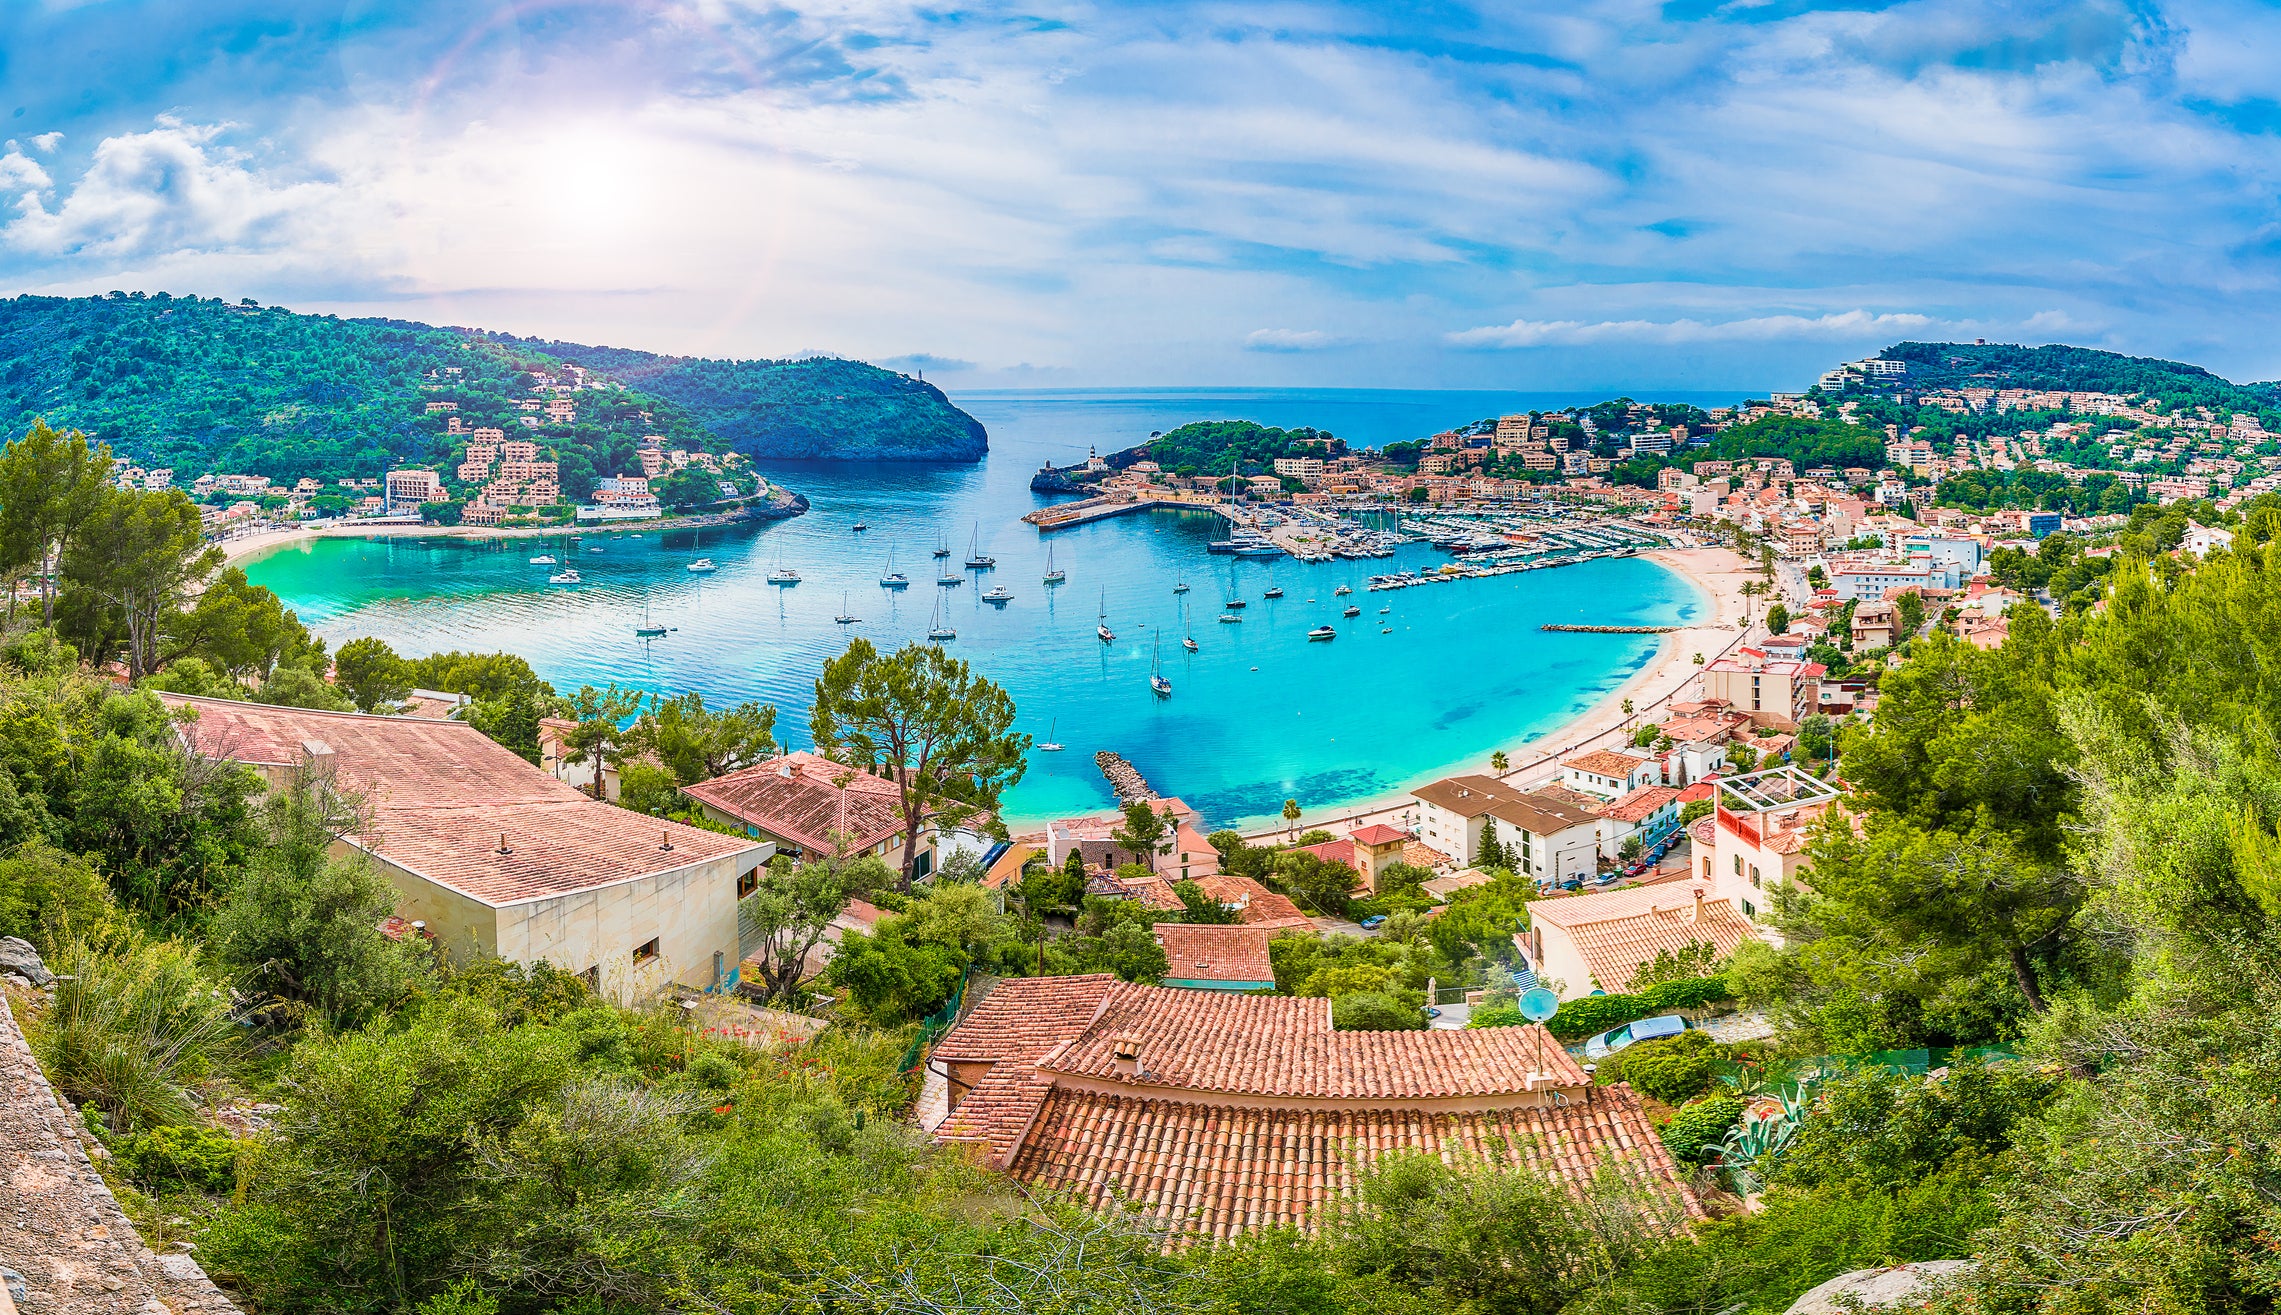 The town of Soller in Mallorca, the largest Balearic island